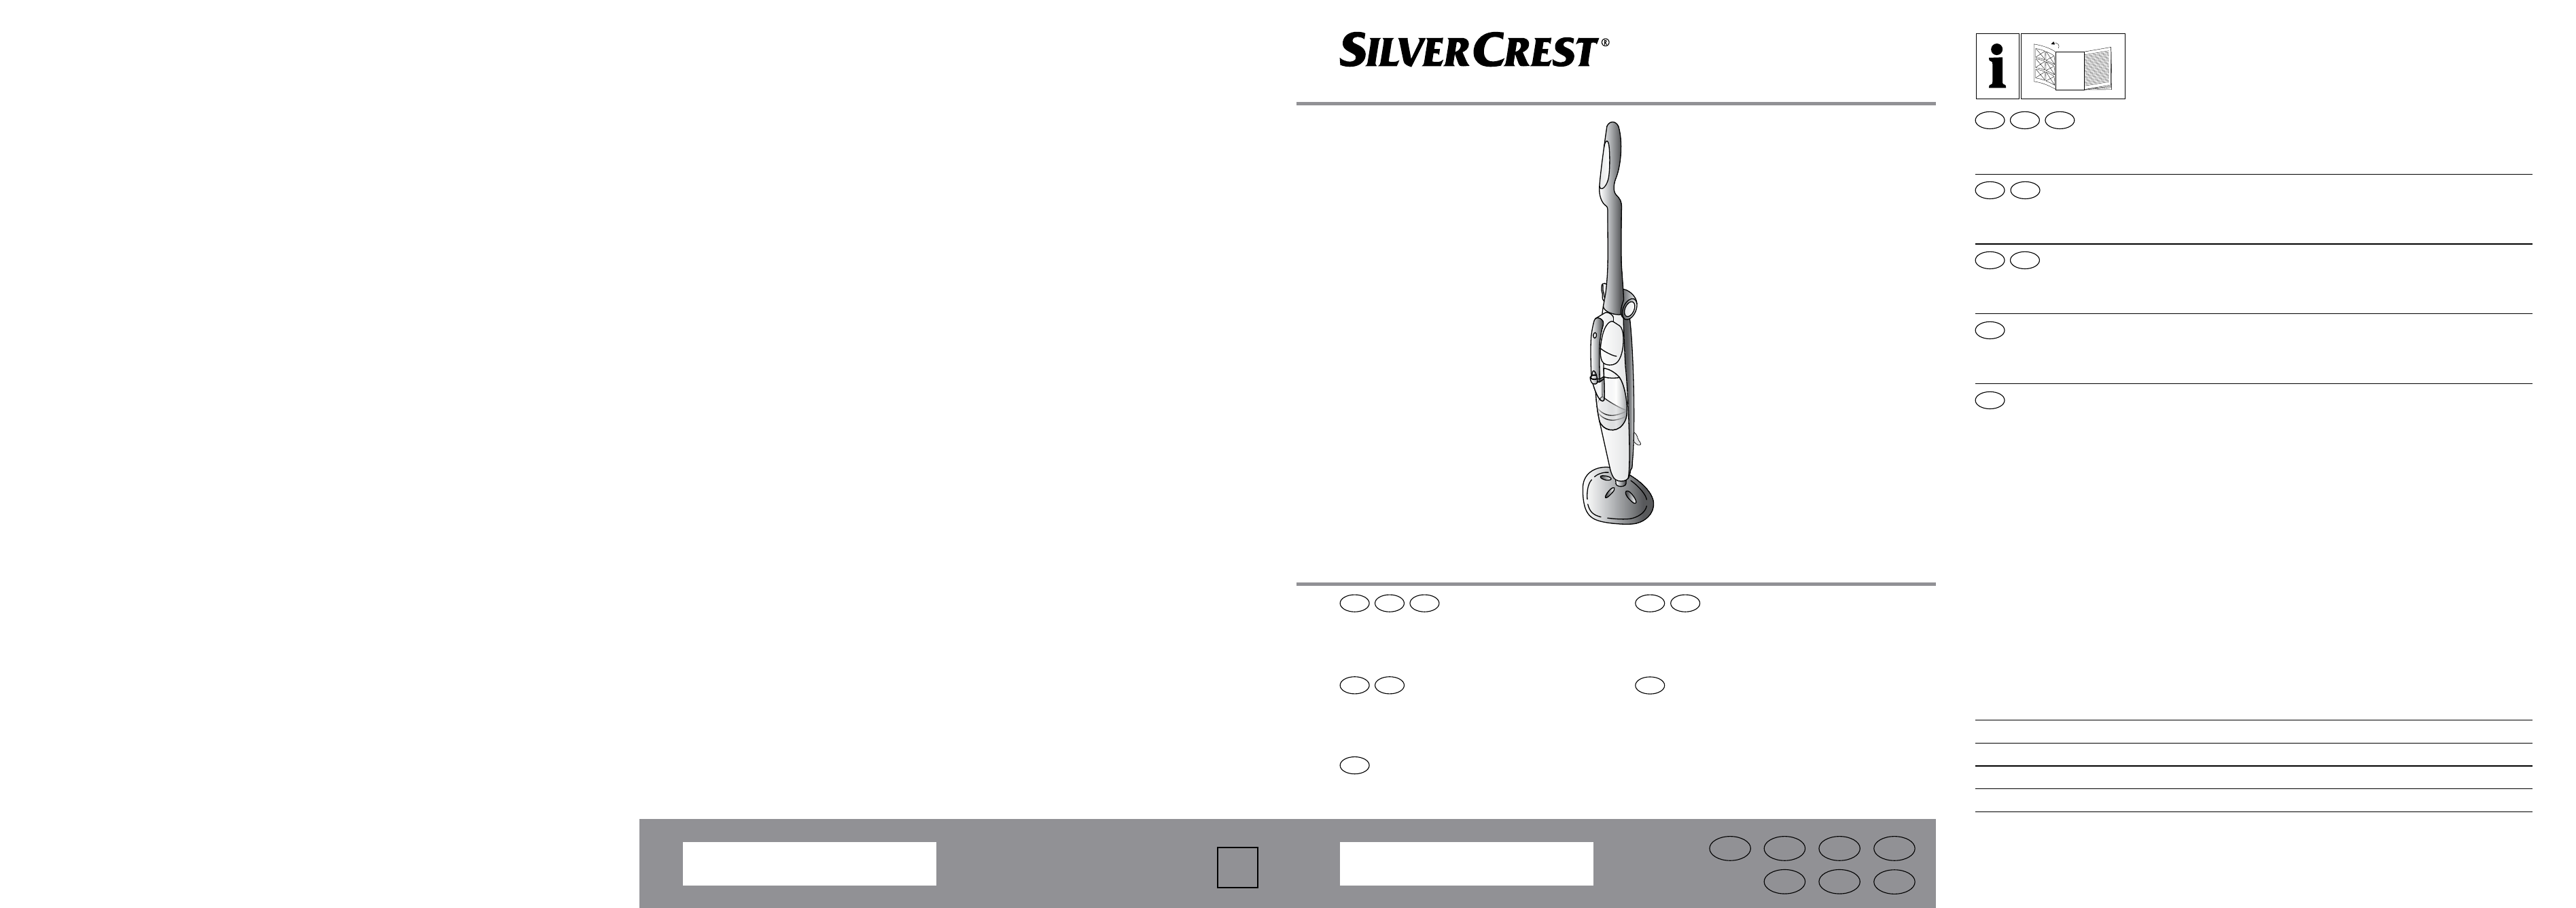 Silvercrest SDM 1500 A1 User Manual | 64 pages